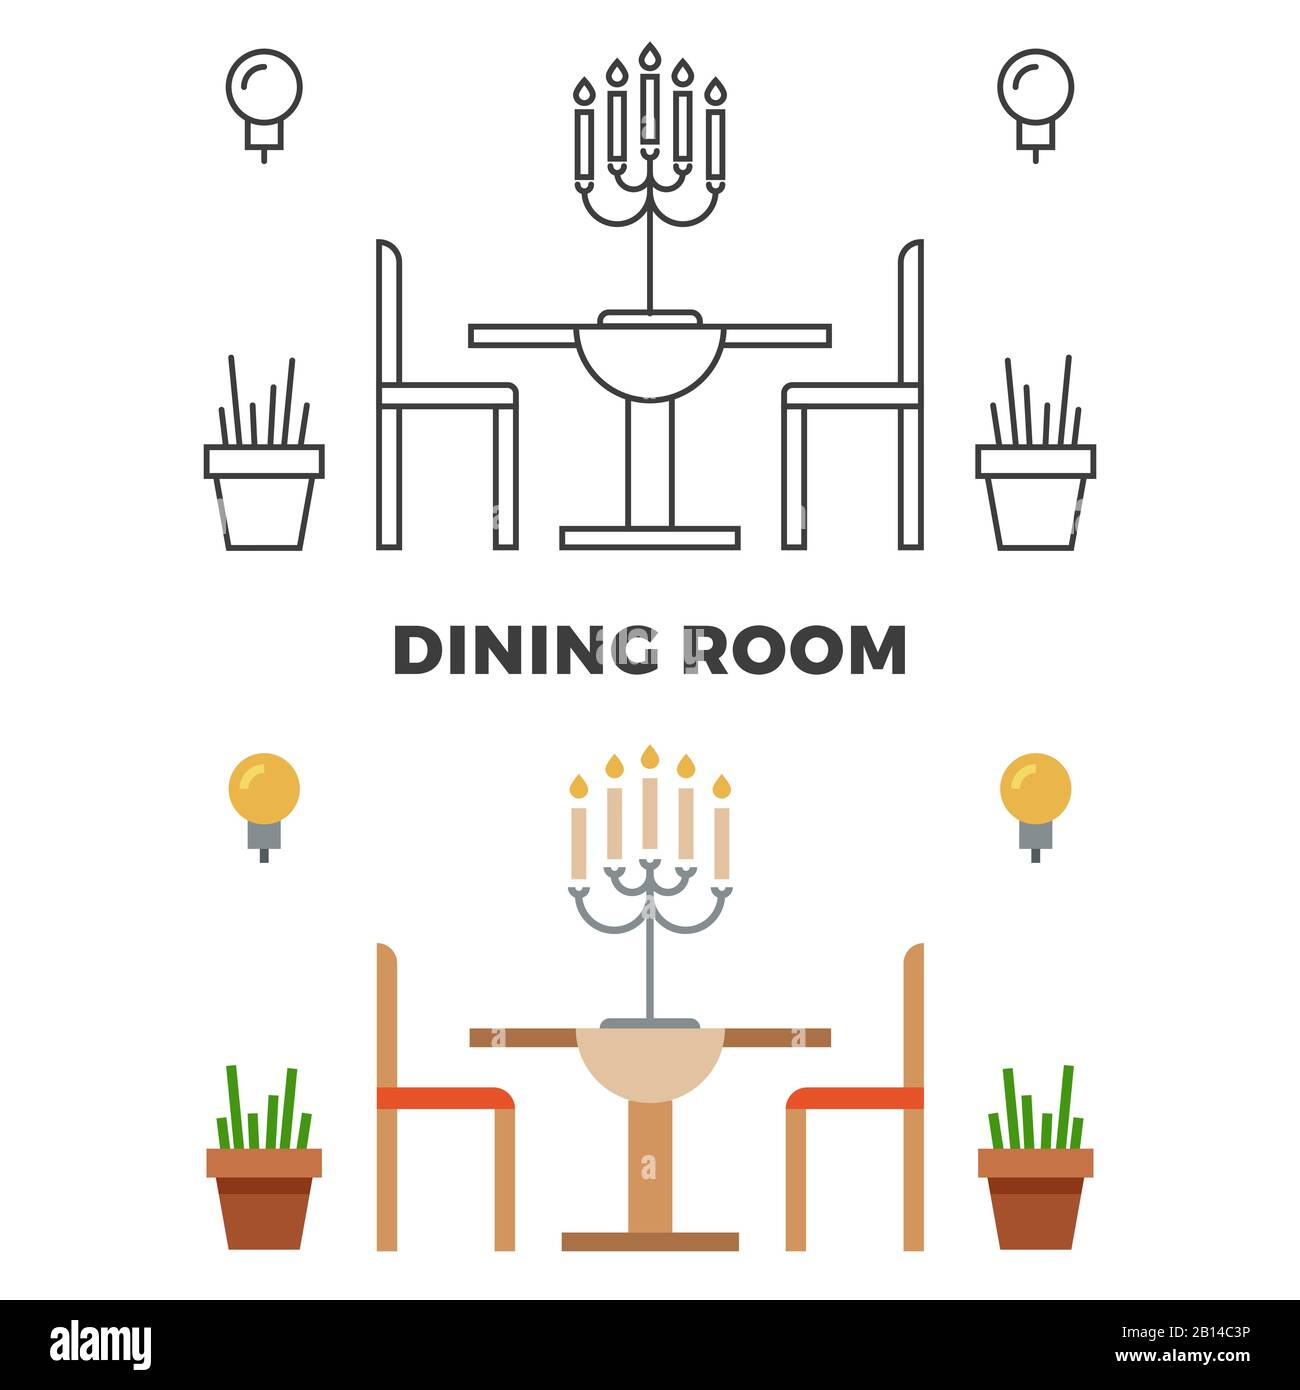 Dining room concept - flat style and line style dining room. Vector illustration Stock Vector